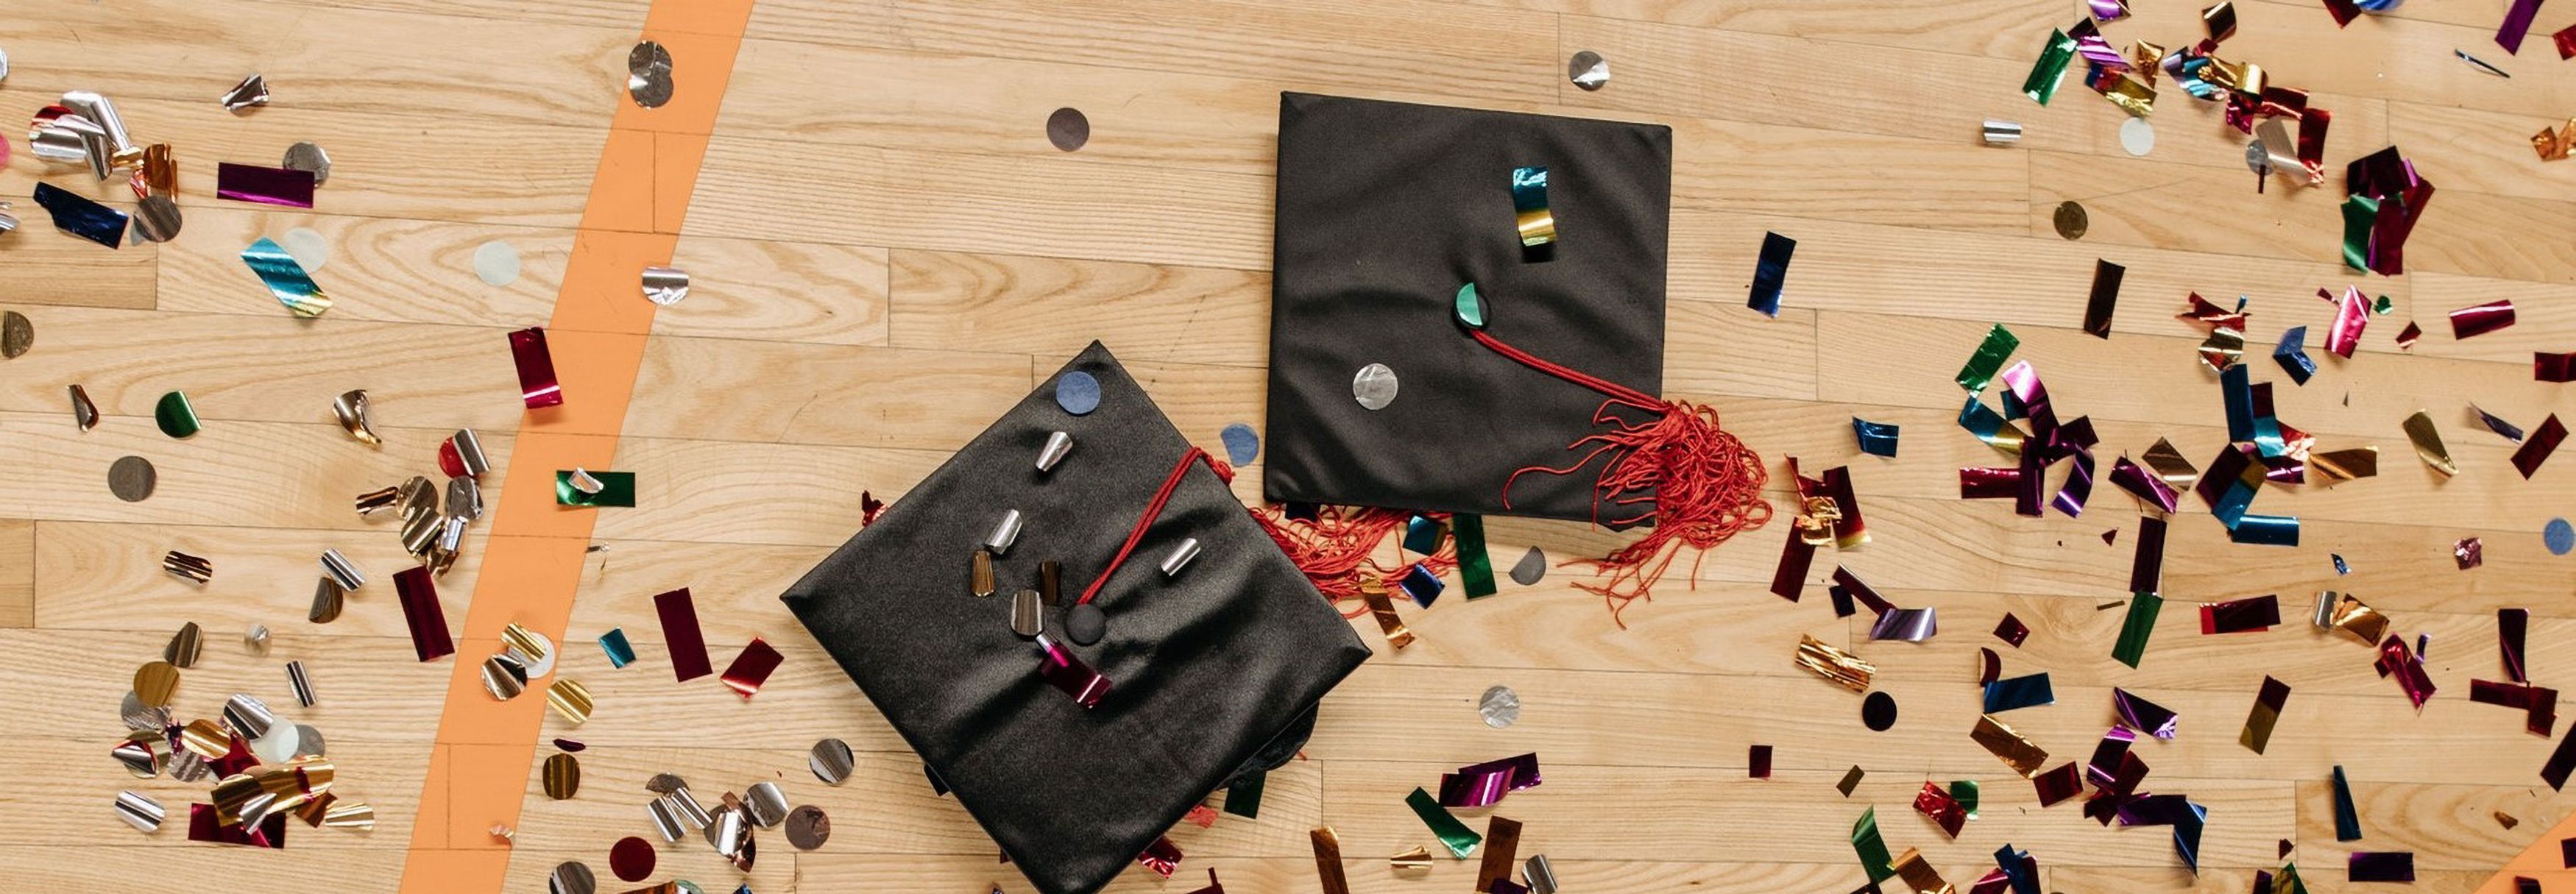 Two graduation caps on a gym floor with some confetti. It's a stock photo. I'll replace it with a picture of the graduating class this year.